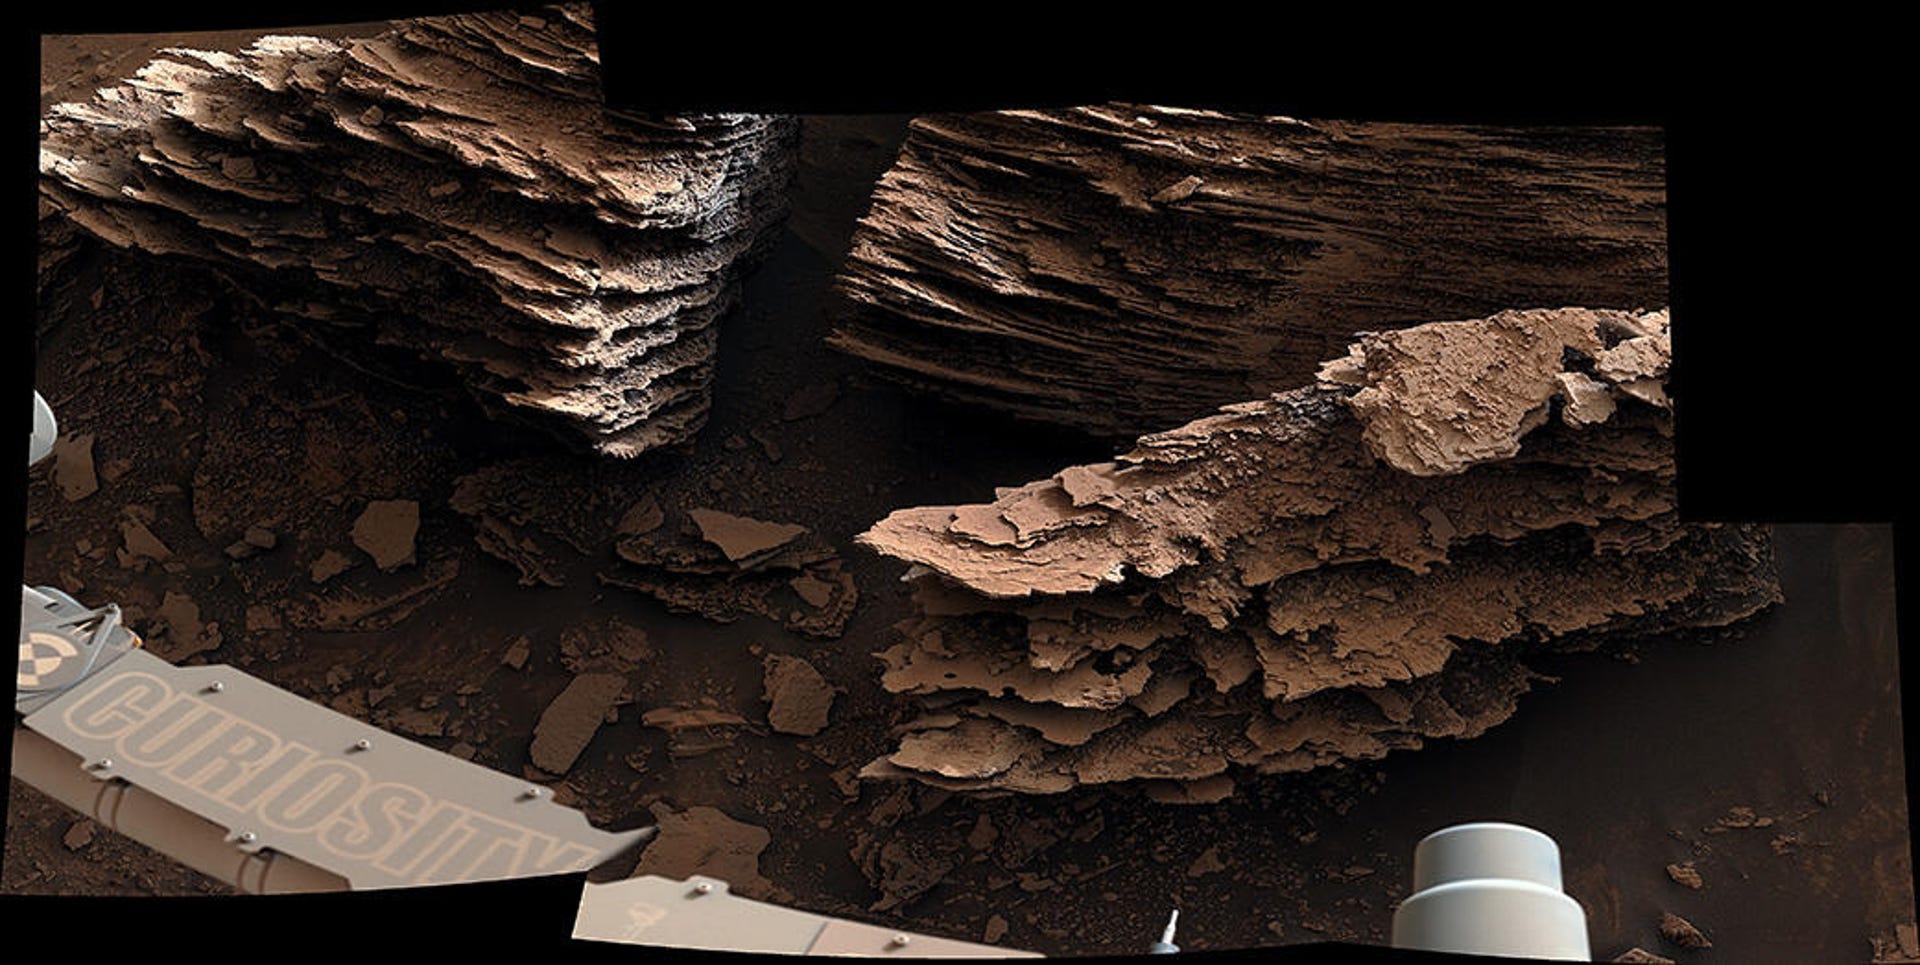 A part of the Curiosity rover appears in the corner of a close-up showing a finely layered, crispy-looking rock formation.